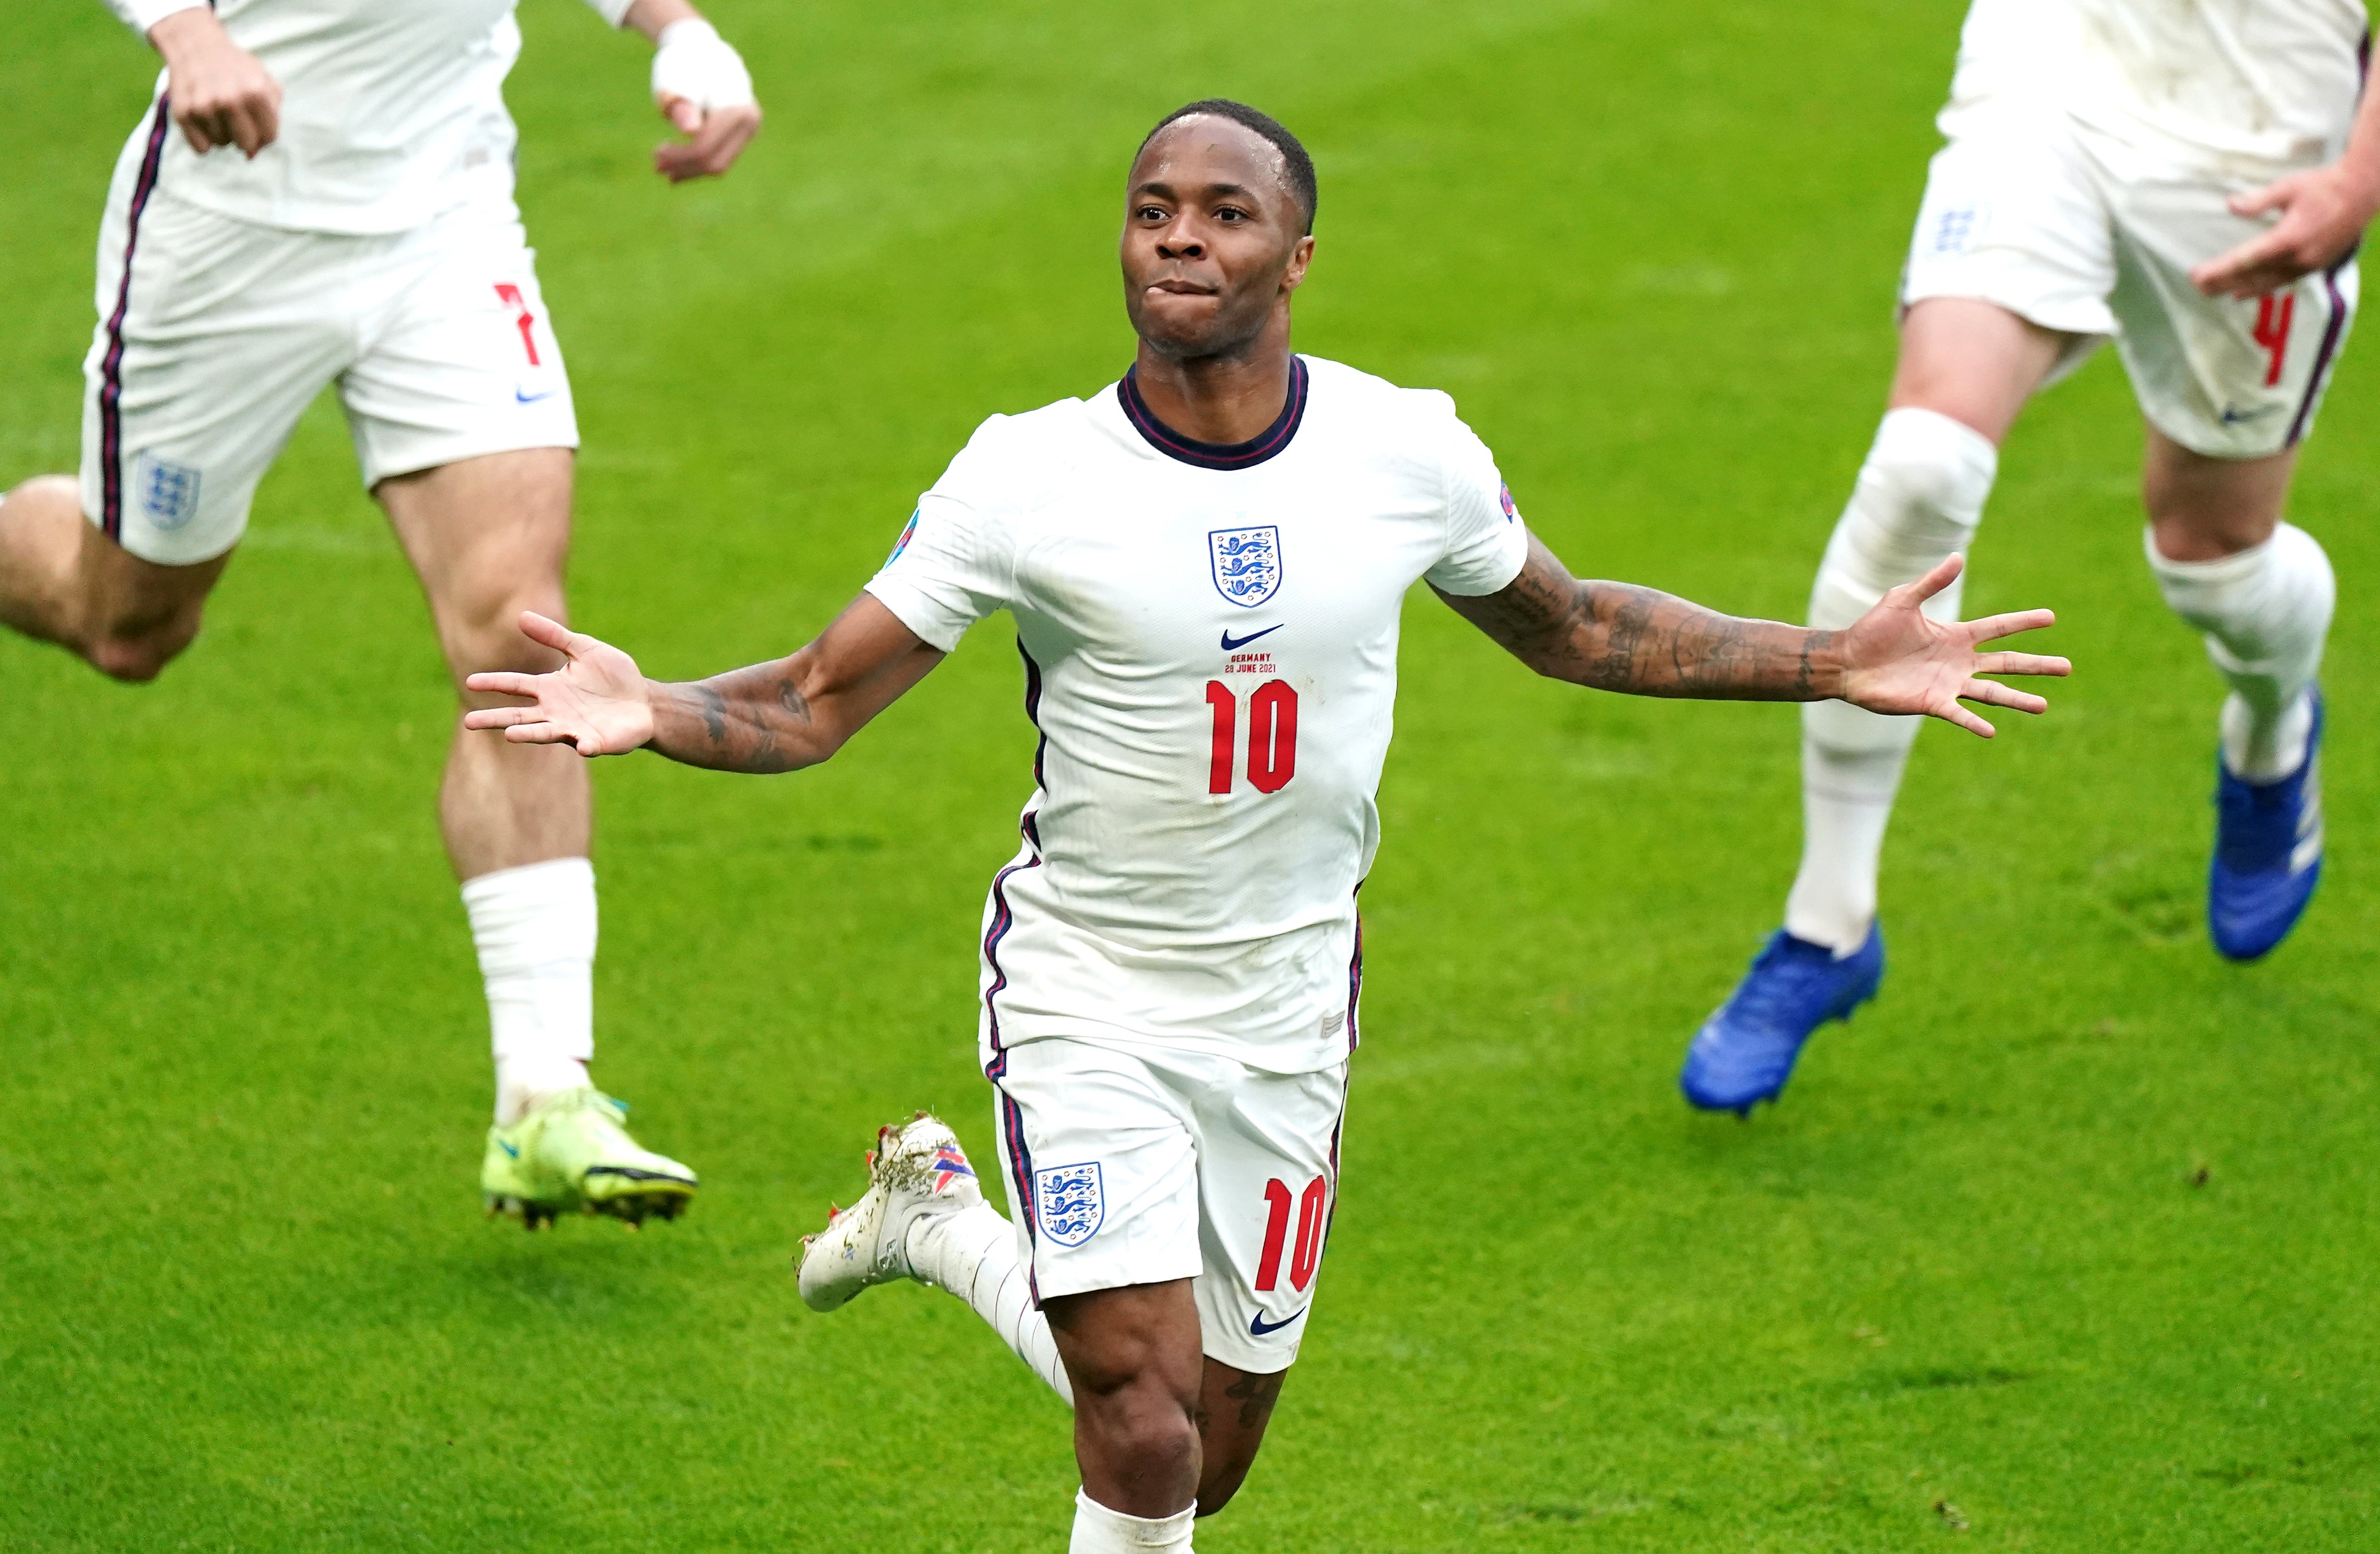 Raheem Sterling celebrates after scoring England’s opening goal against Germany in the Euro 2020 clash.